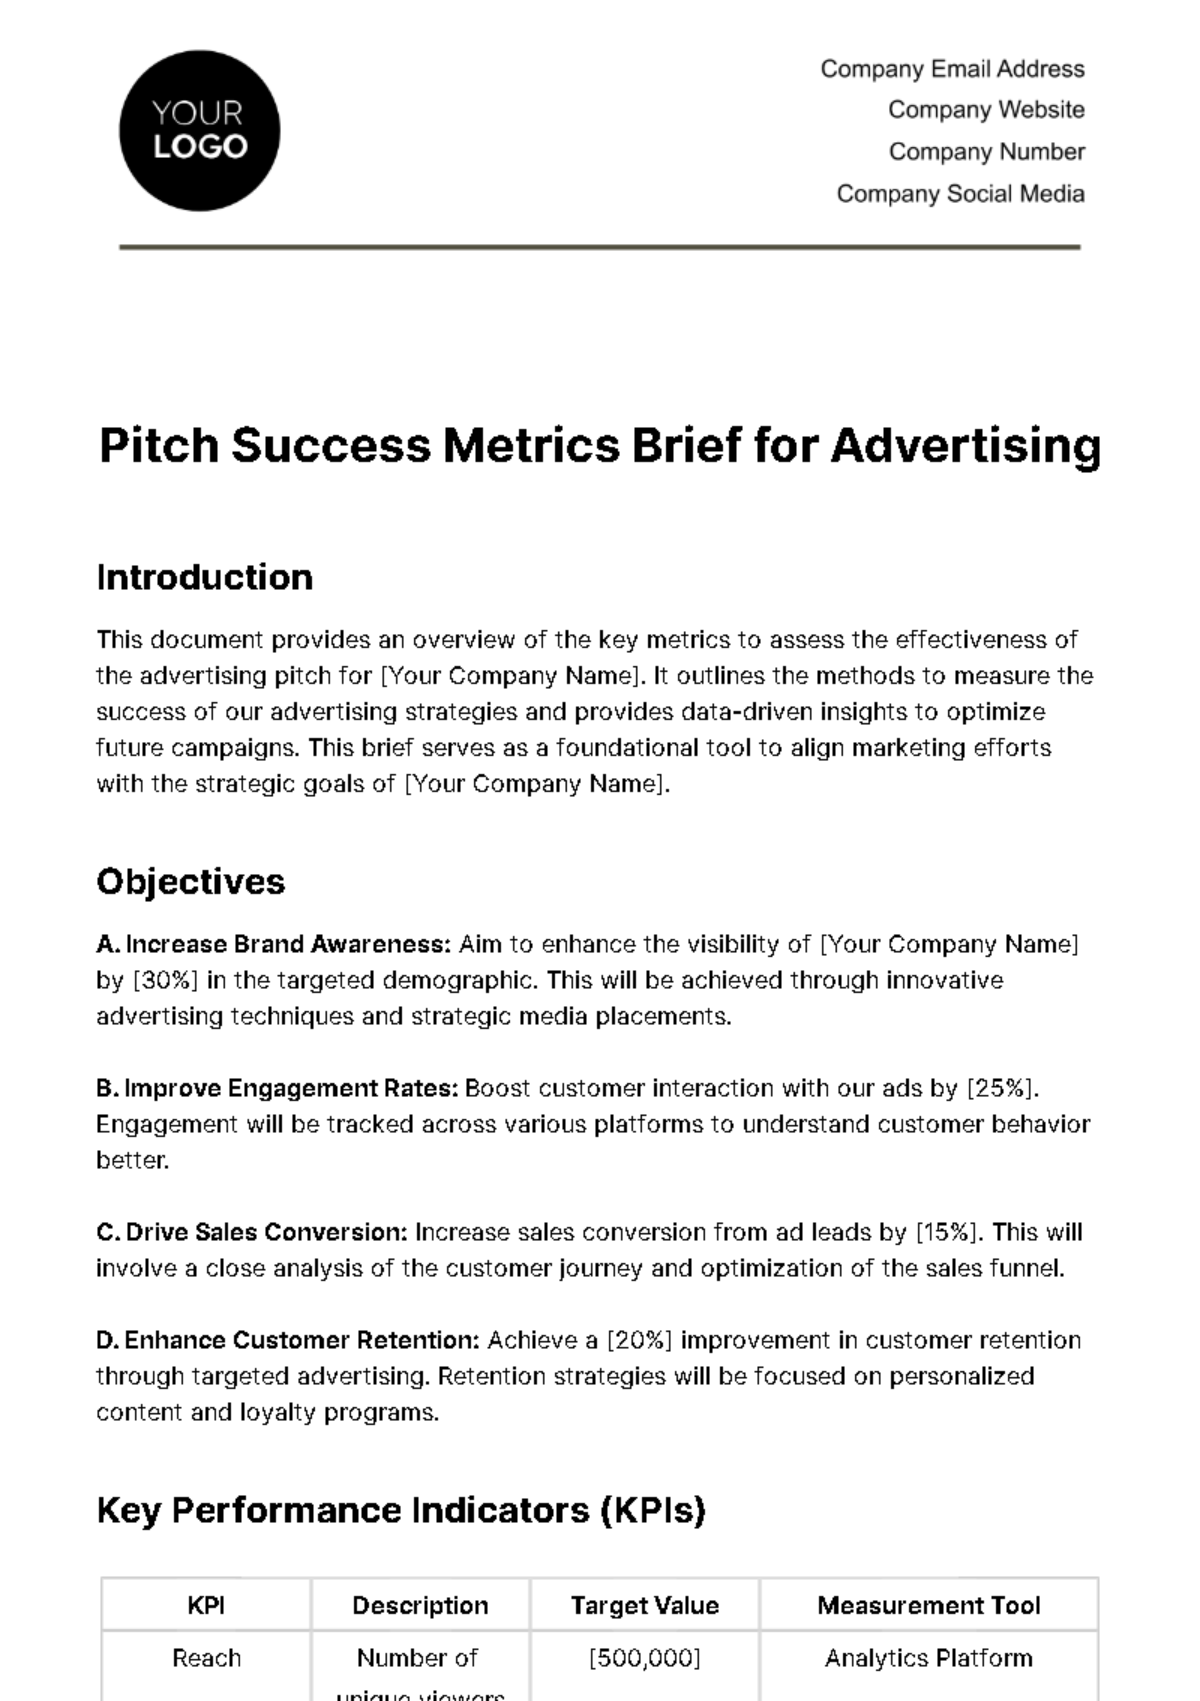 Pitch Success Metrics Brief for Advertising Template